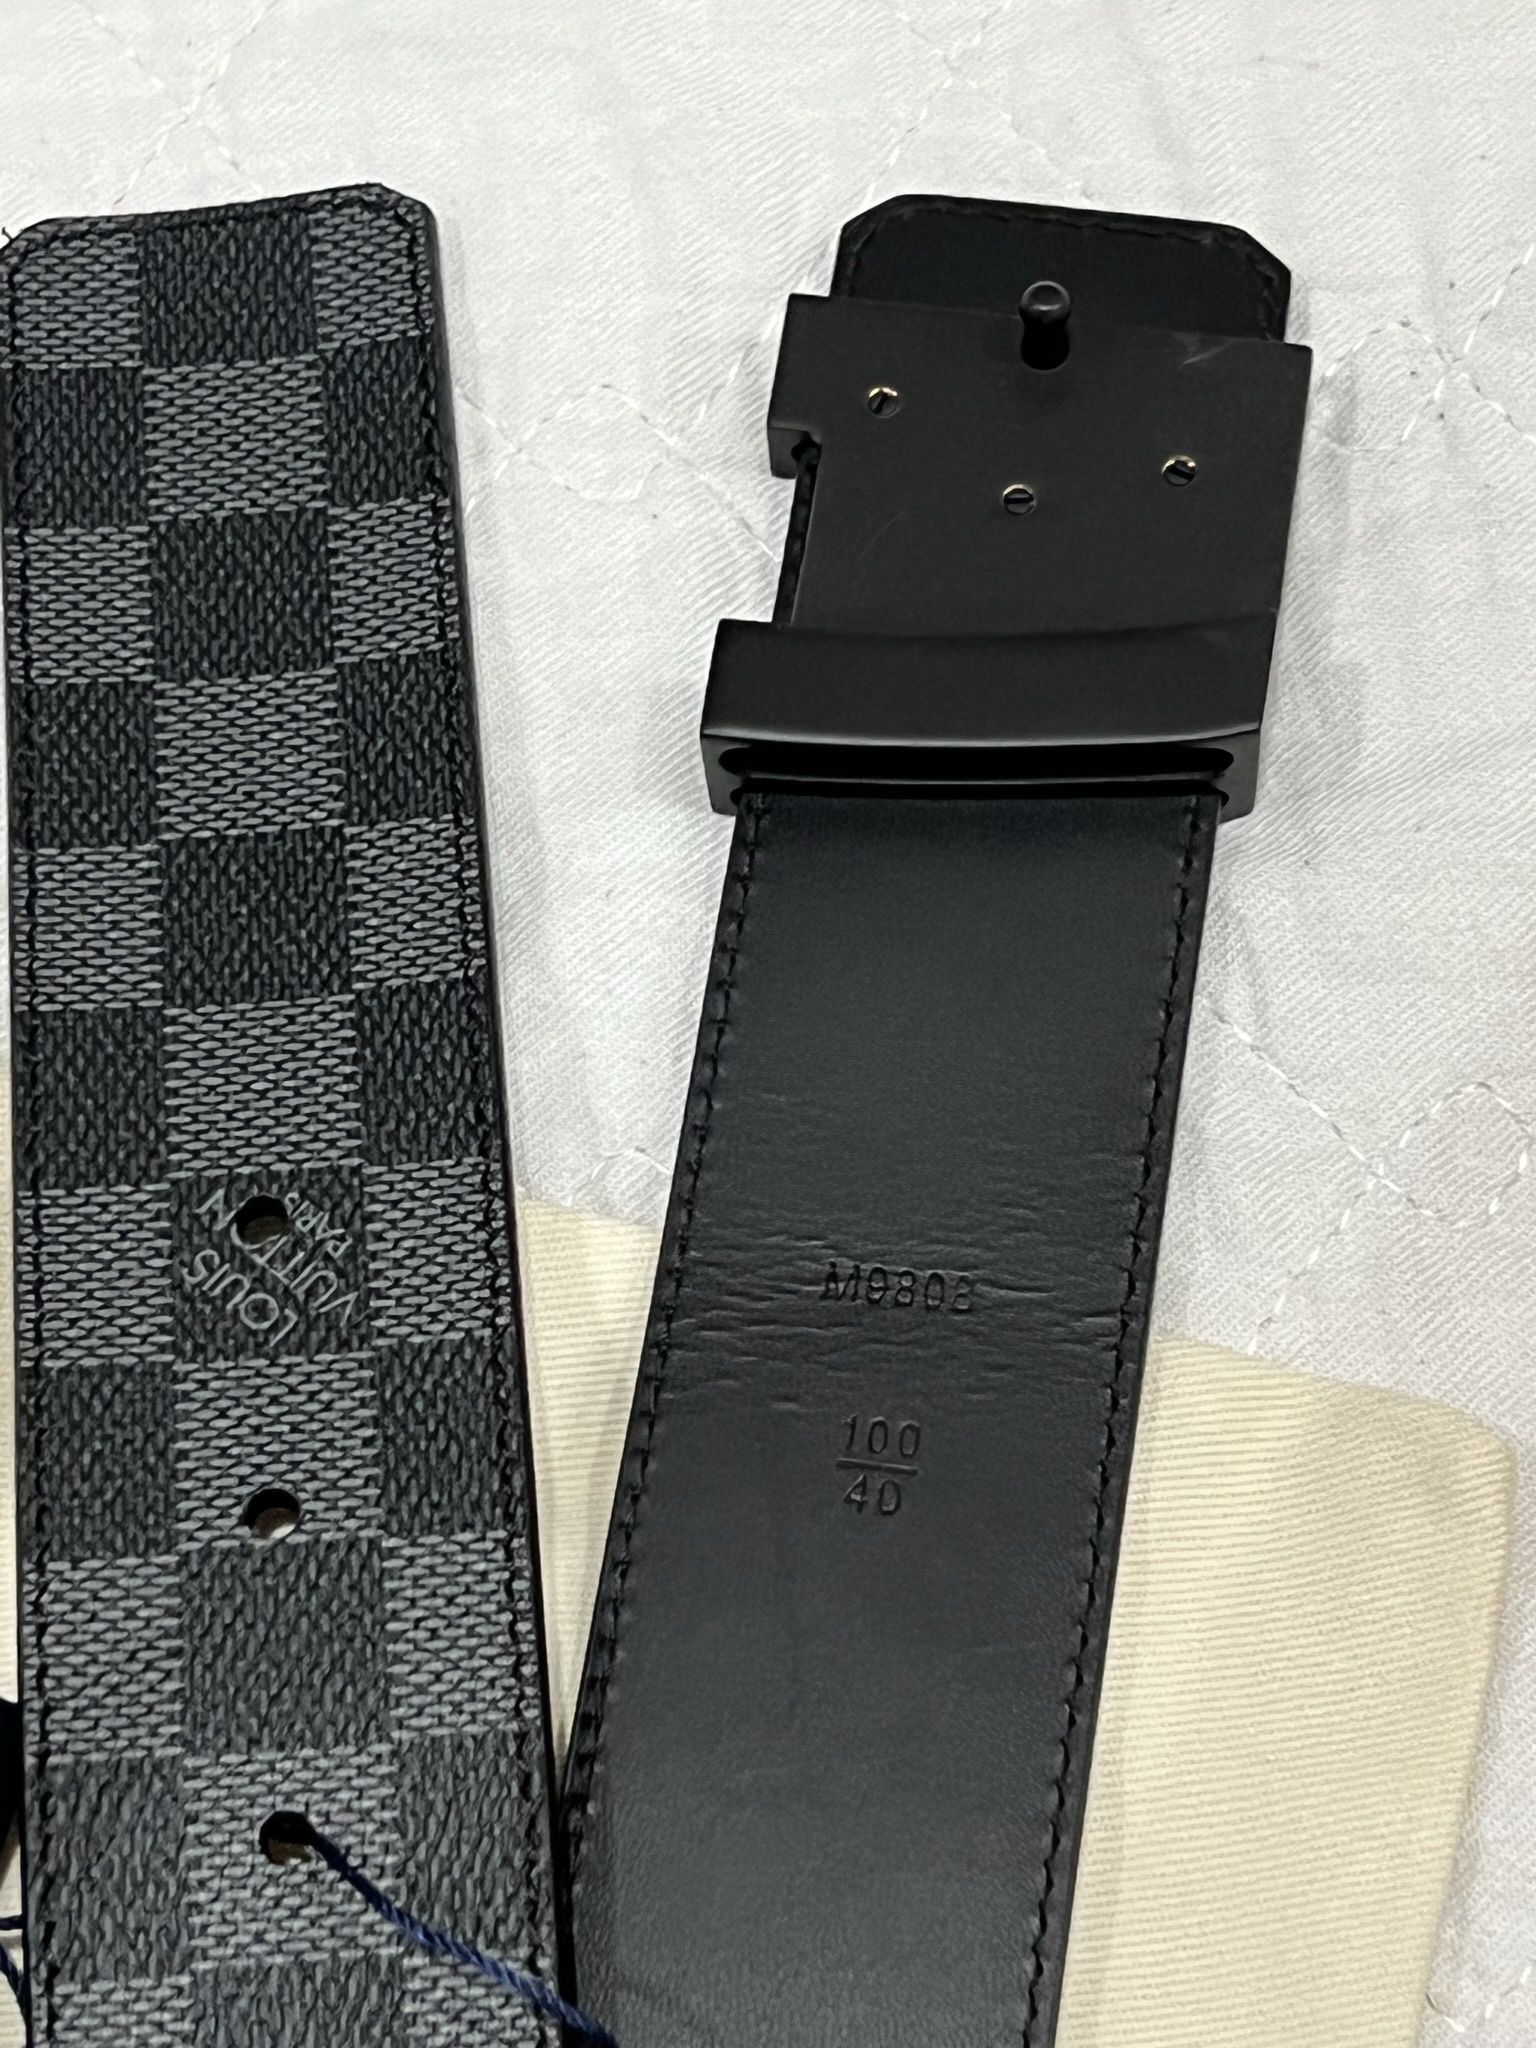 Brand New Authentic Louis Vuitton Belt for Sale in Queens, NY